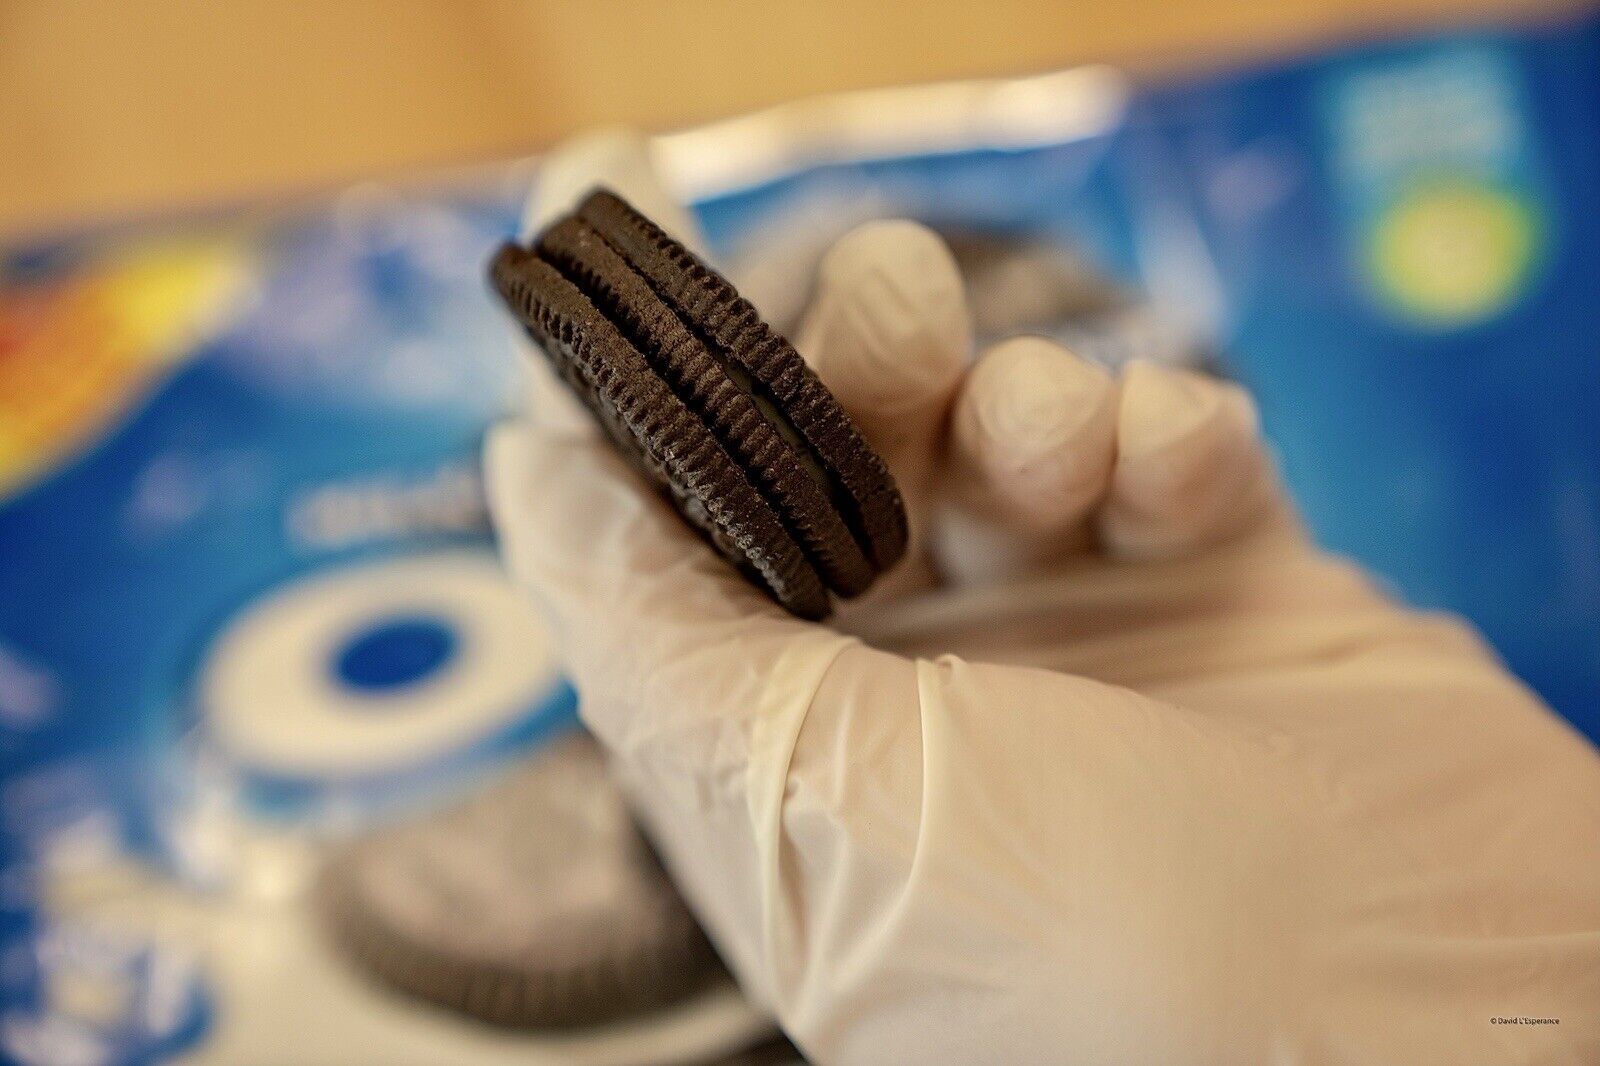 *EXTREMELY RARE* Factory Defect Oreo Double Stacked With 3 Cookies